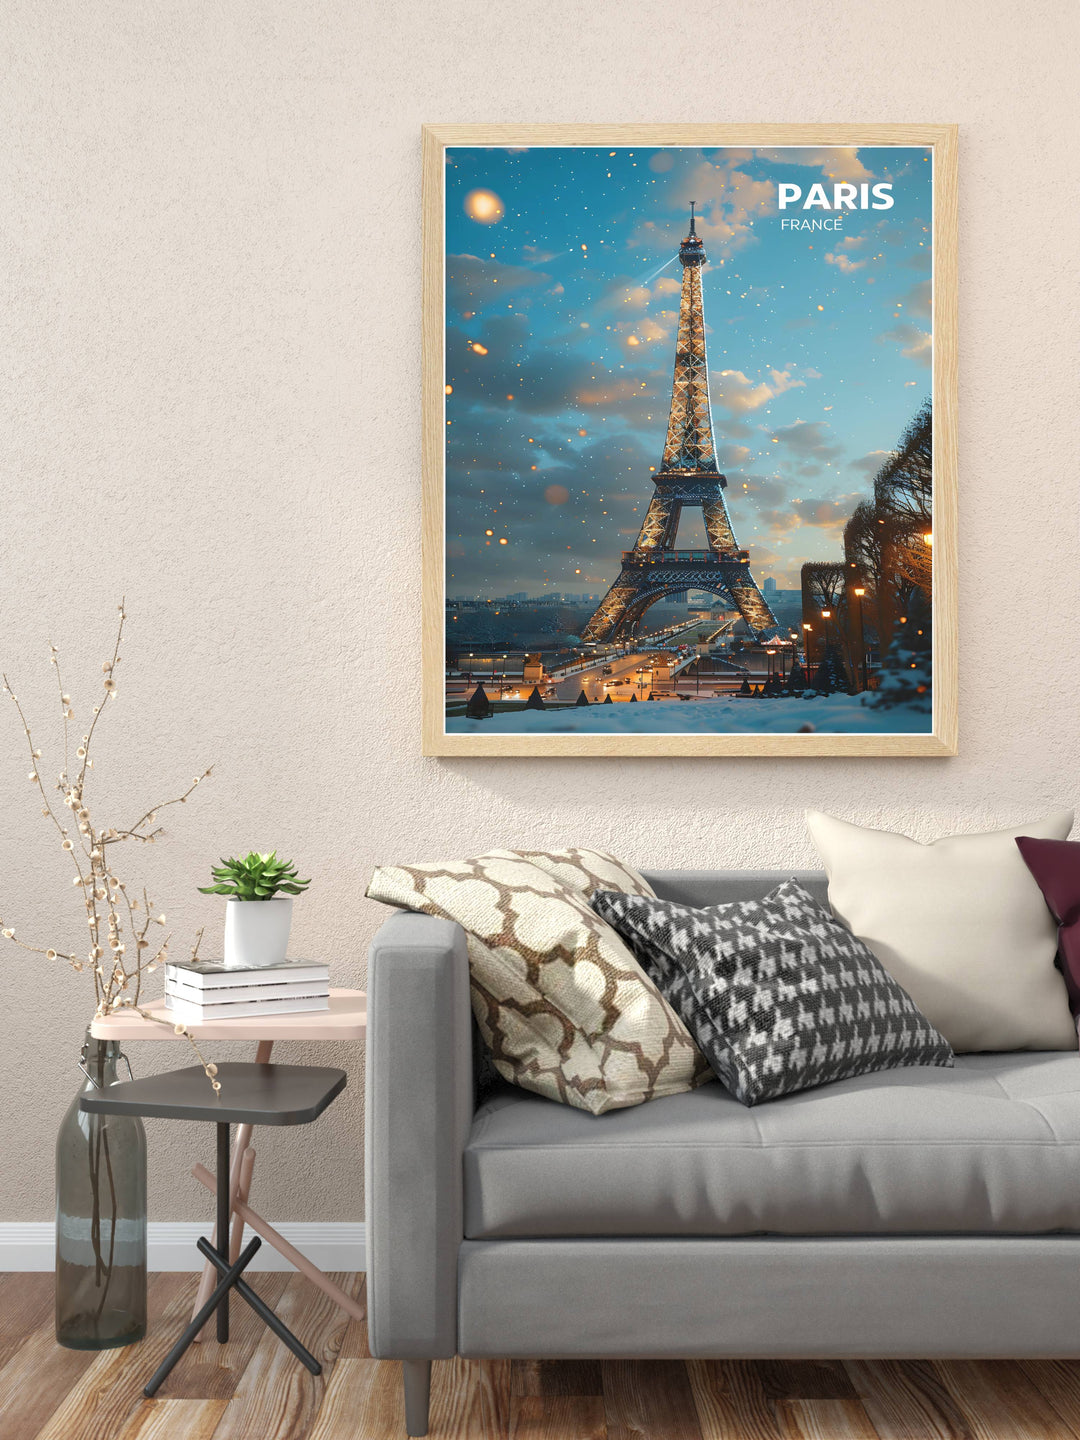 Immerse yourself in the romantic ambiance of Paris with our Eiffel Tower Wall Decor selection, perfect for adding a touch of French elegance to any space.